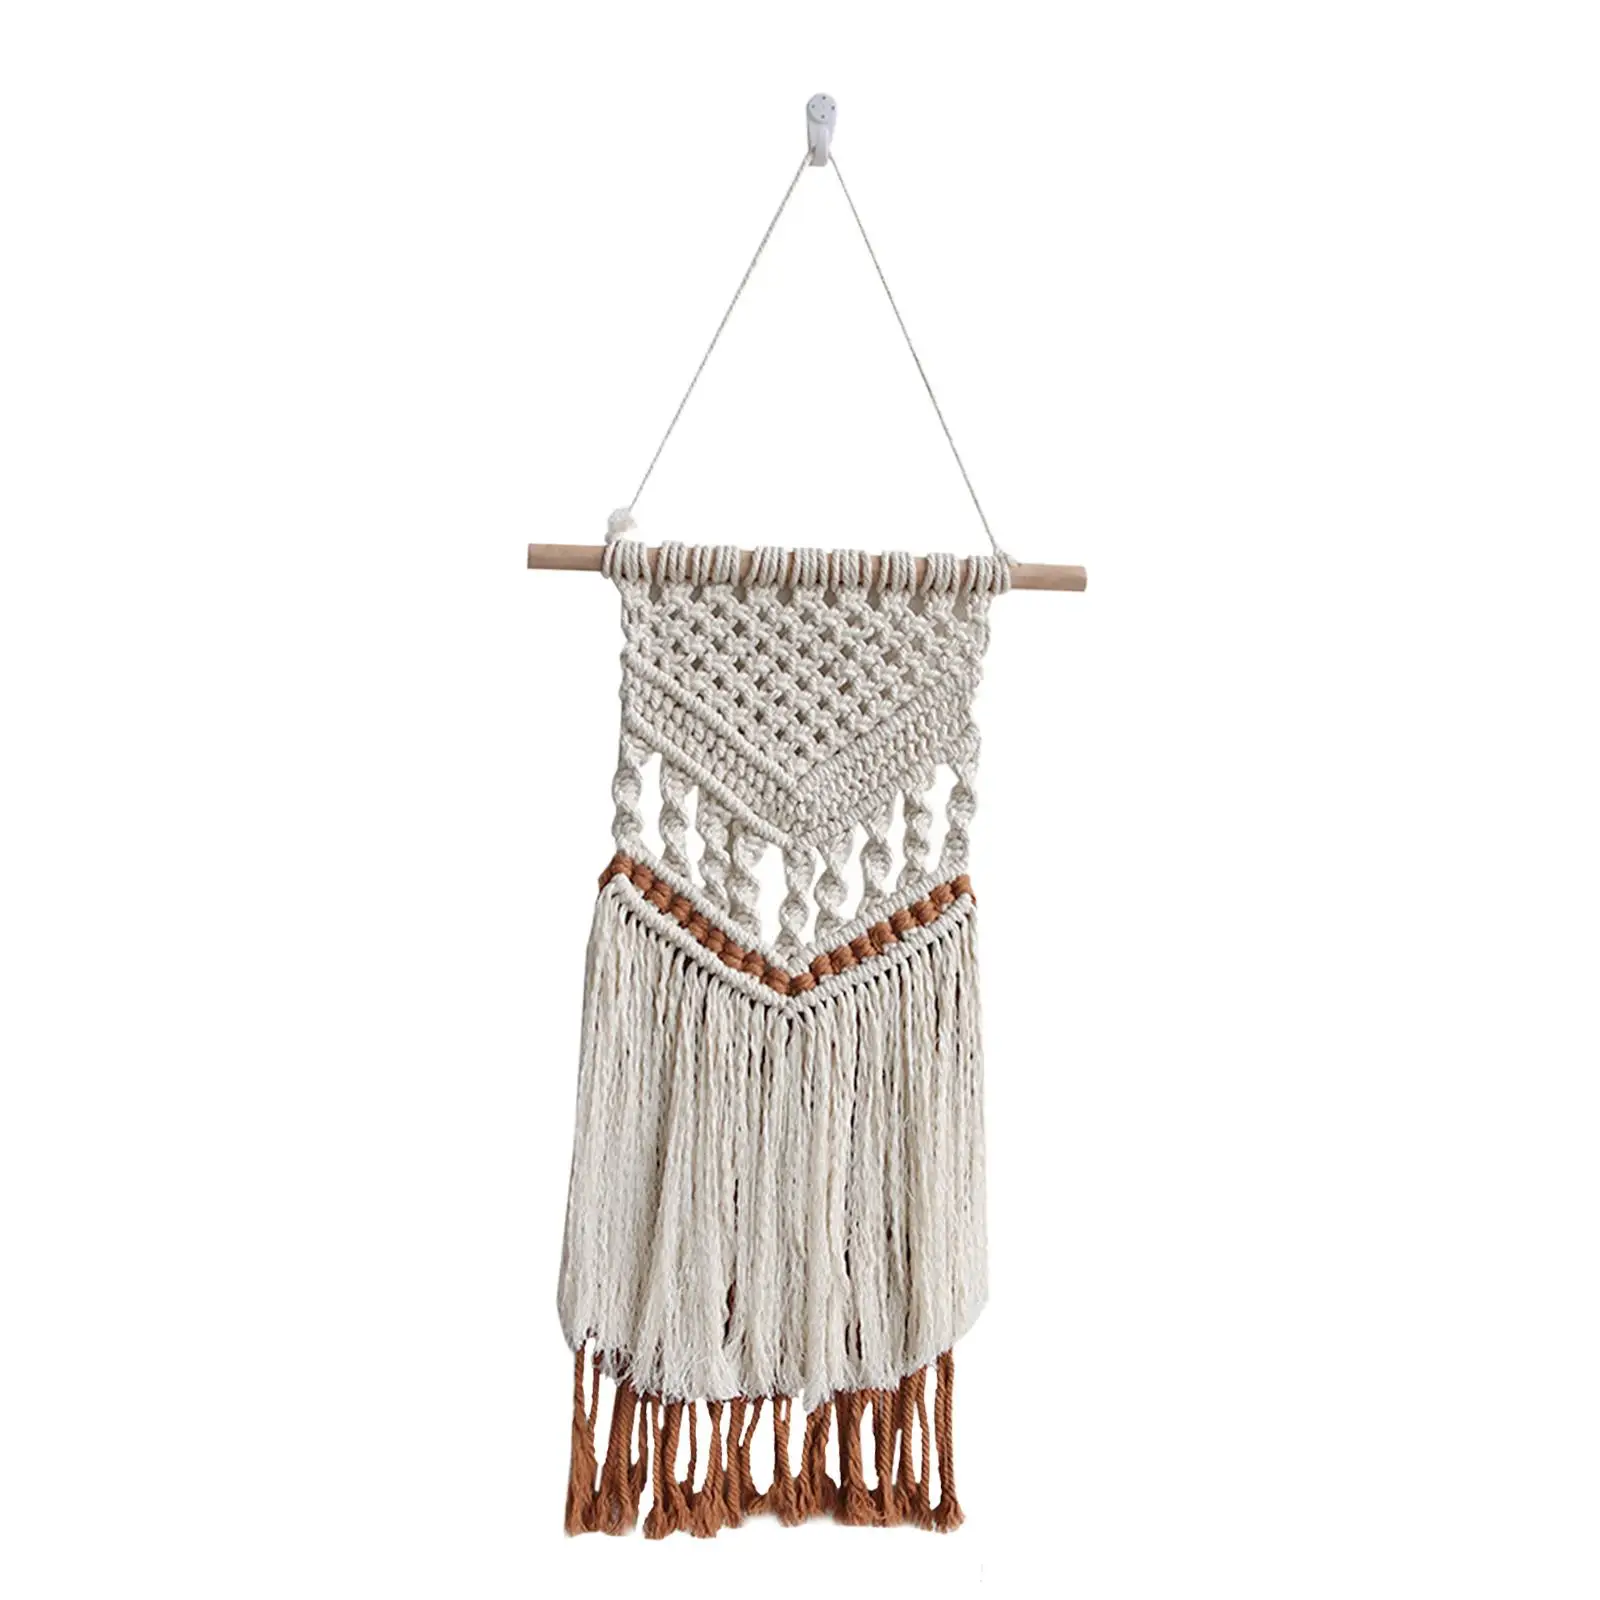 Hand Woven Tapestry Backdrop Tassels Macrame Wall Hanging Bohemian Tapestry Wall Decor for Living Room Nursery Gallery Wedding